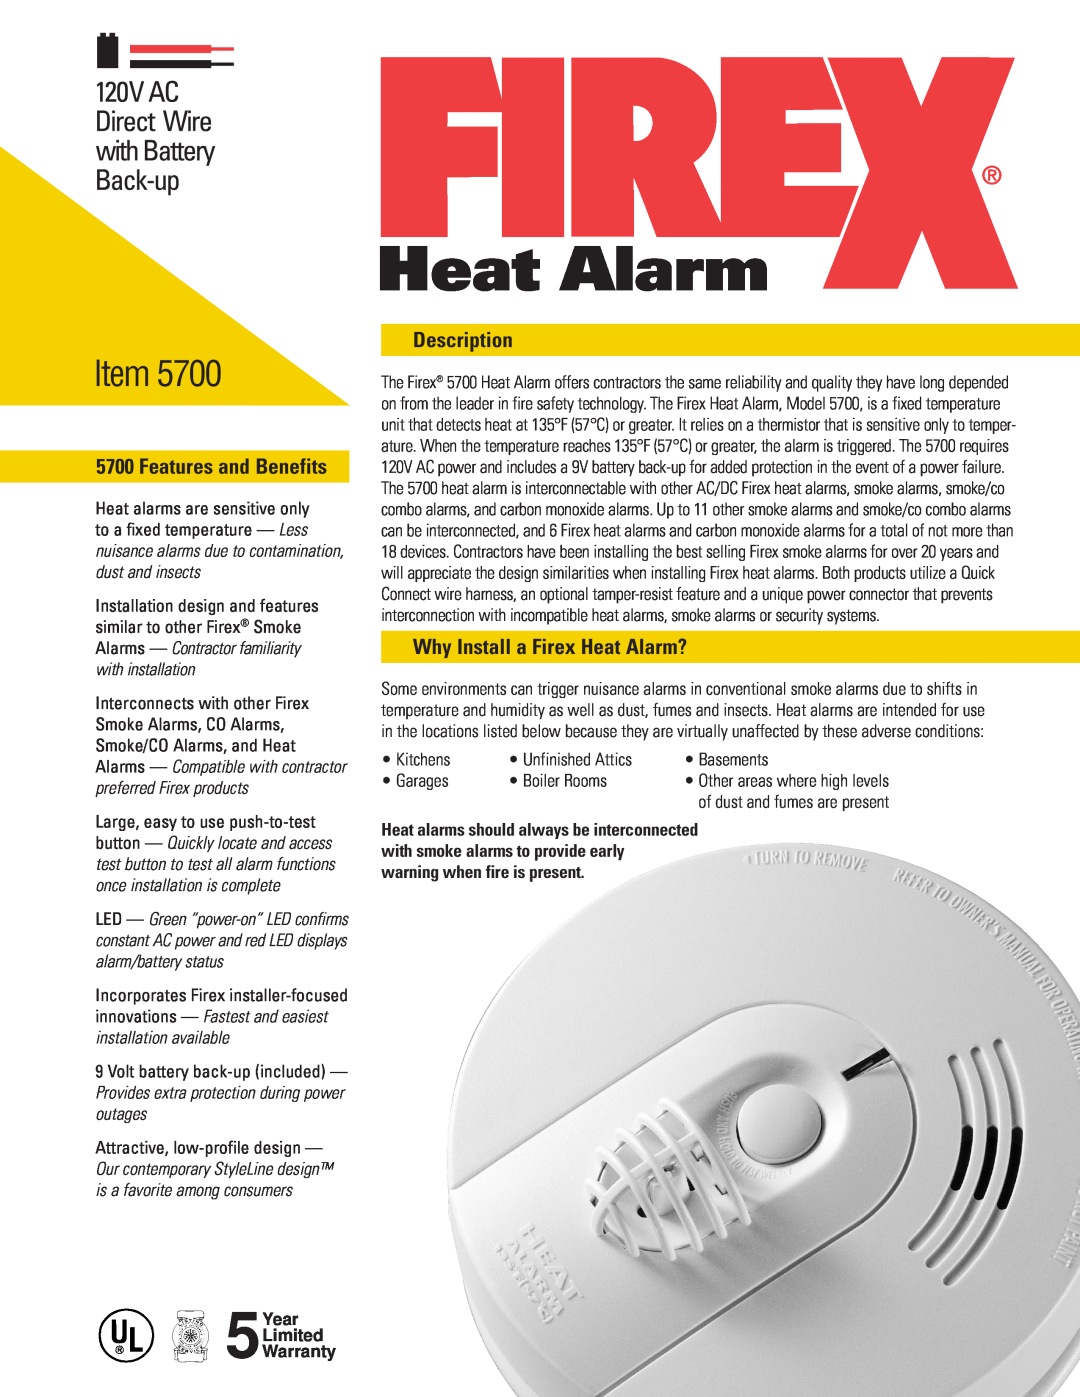 Firex 5700 warranty Features and Benefits, Description, Why Install a Firex Heat Alarm?, Kitchens, Unfinished Attics 